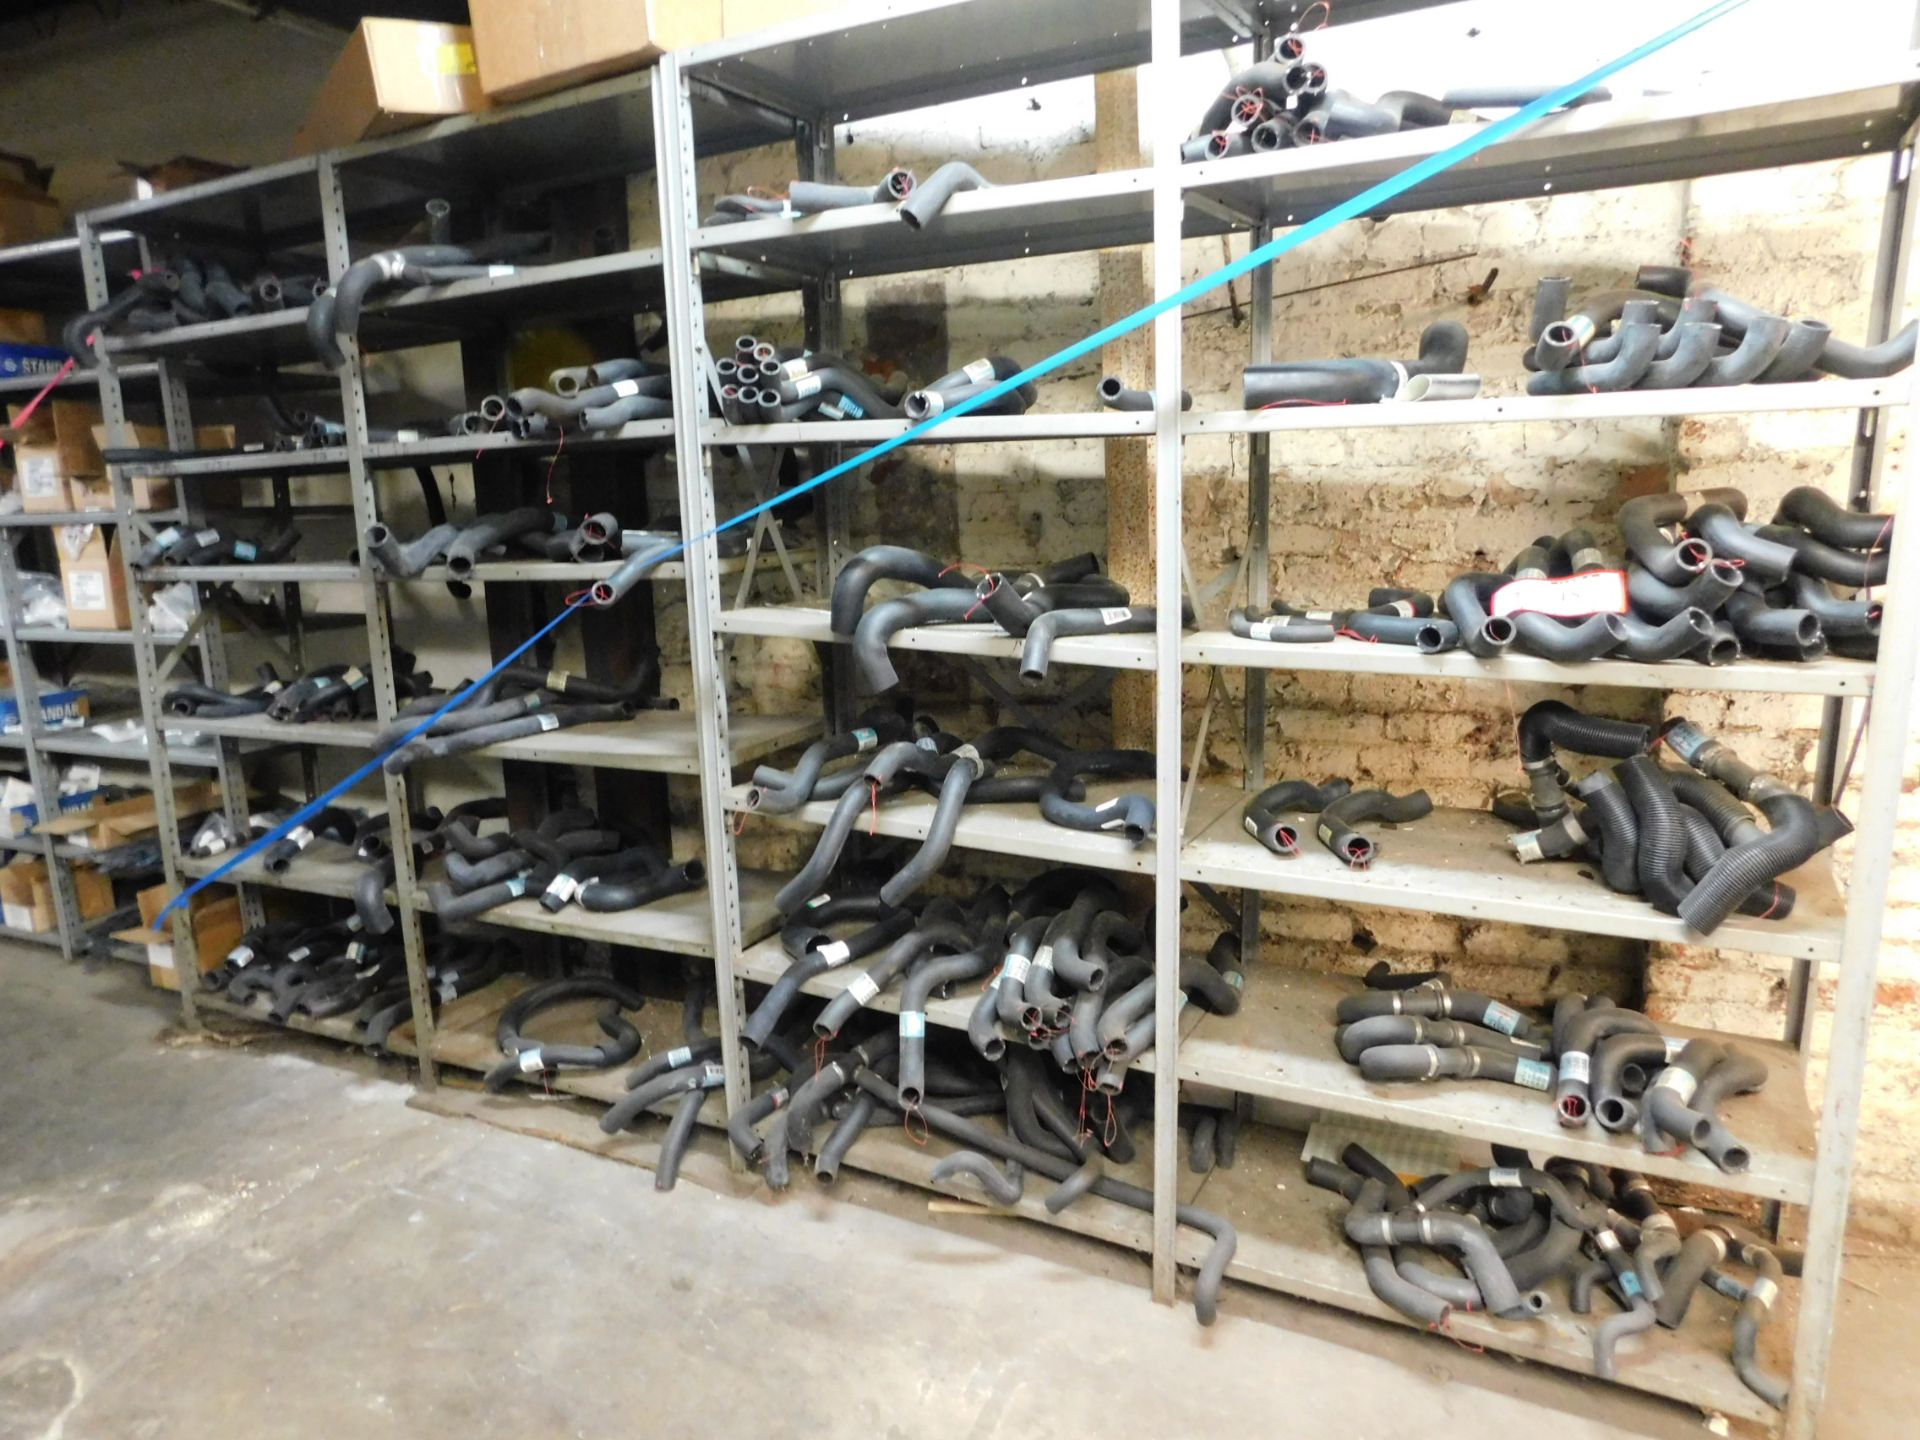 Contents of (4) Sections of Metal Racking, Radiator Hoses, Heater Hoses, Large Quantity, Various